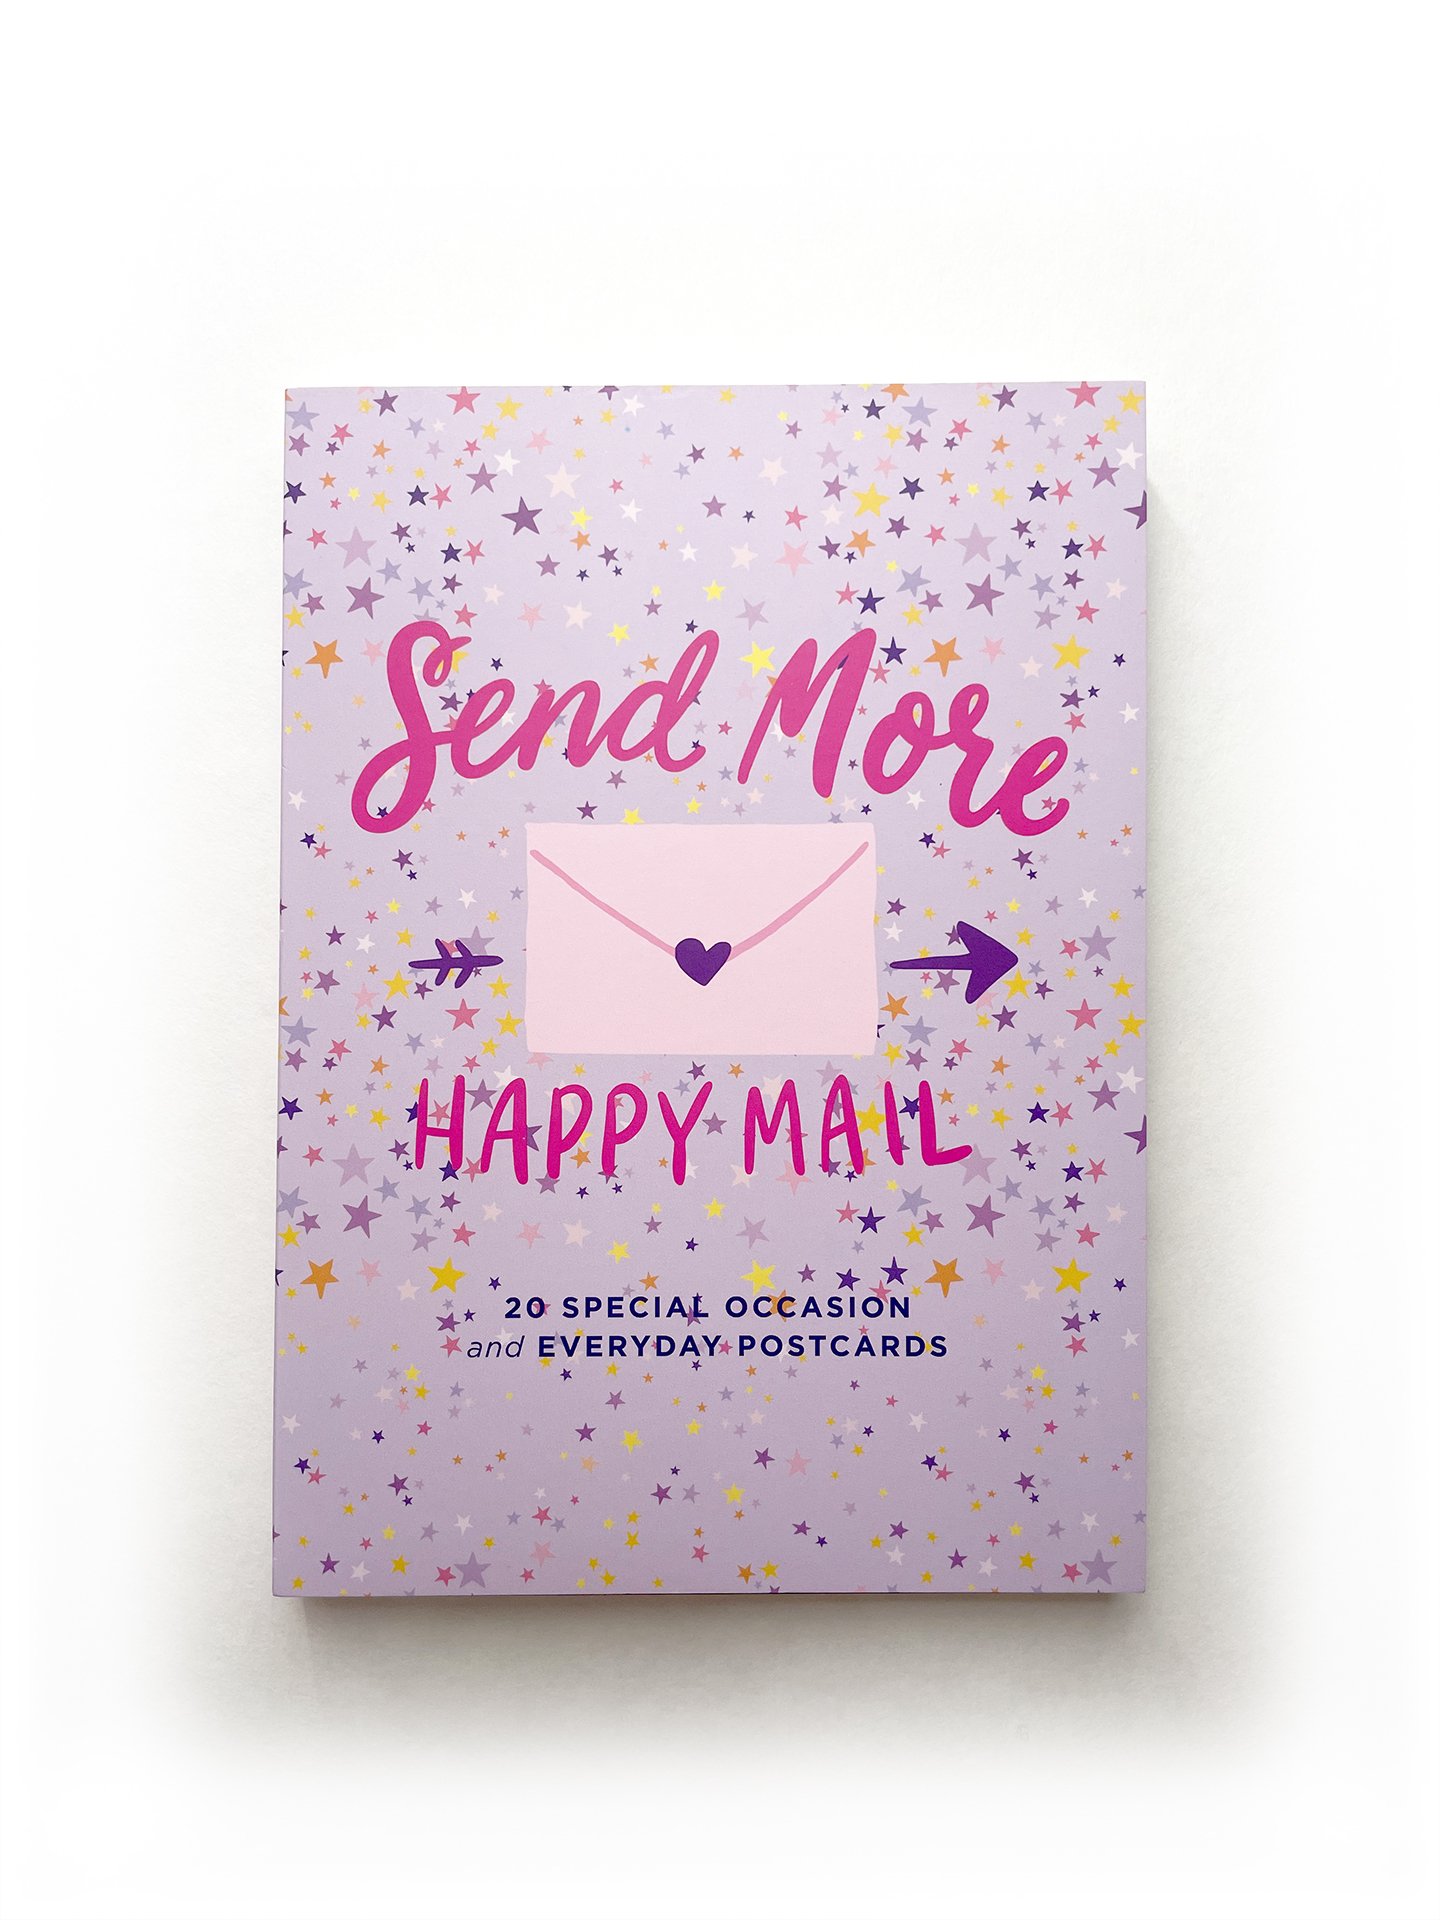 Send-More-Happy-Mail-Cover.jpg